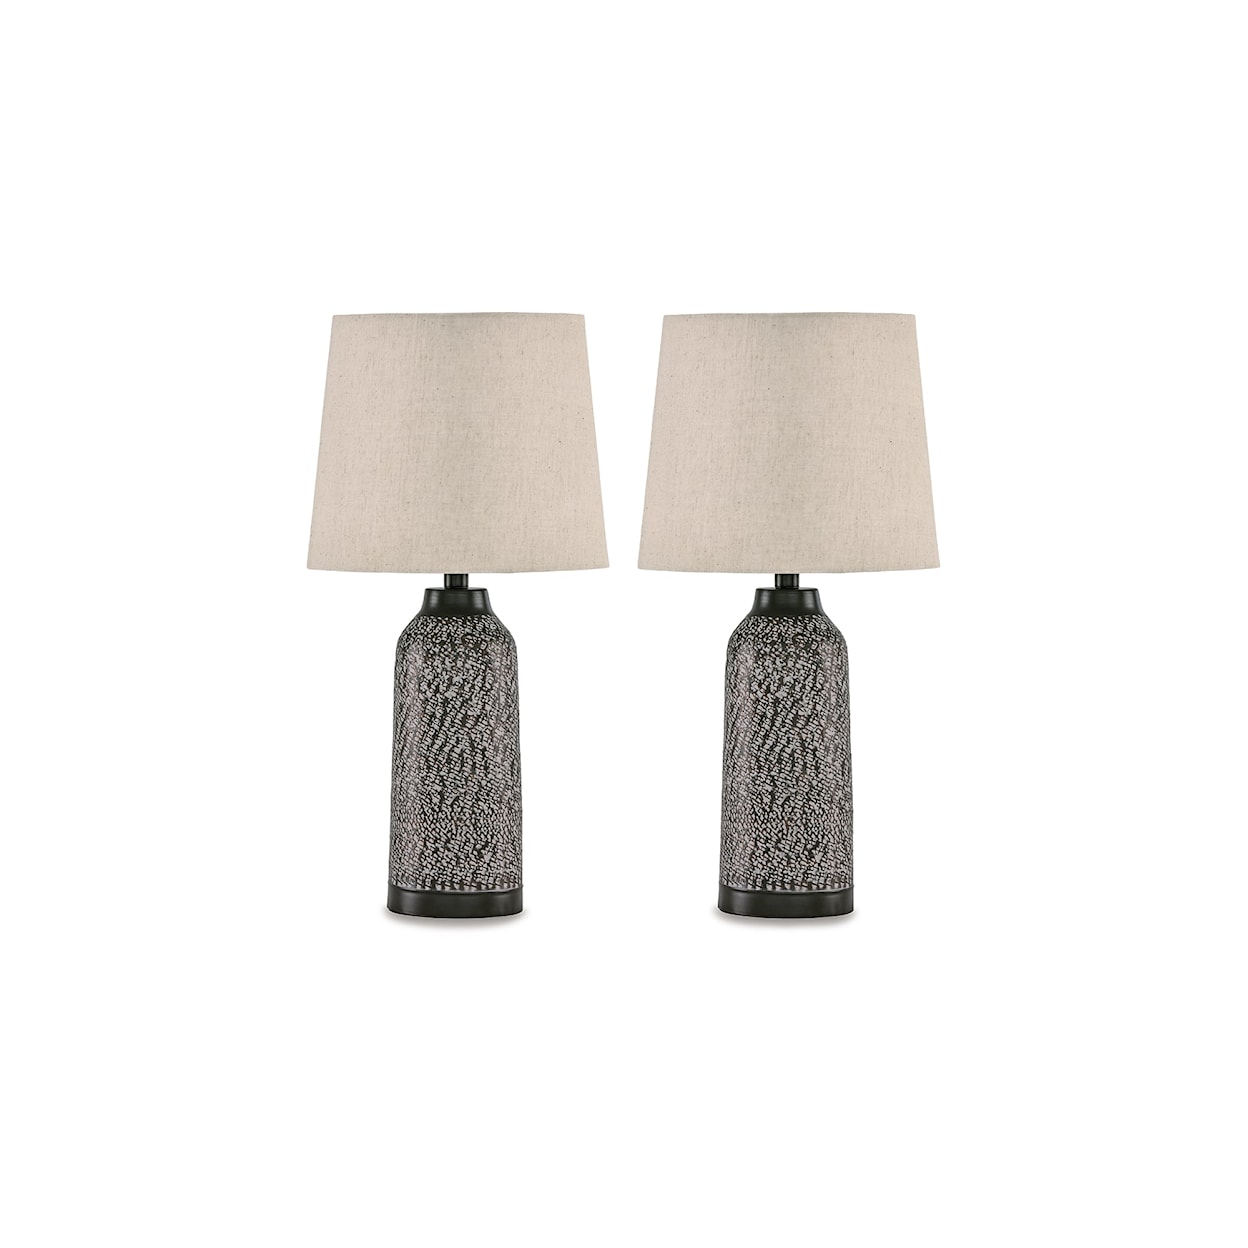 Signature Design by Ashley Lanson Metal Table Lamp (Set of 2)